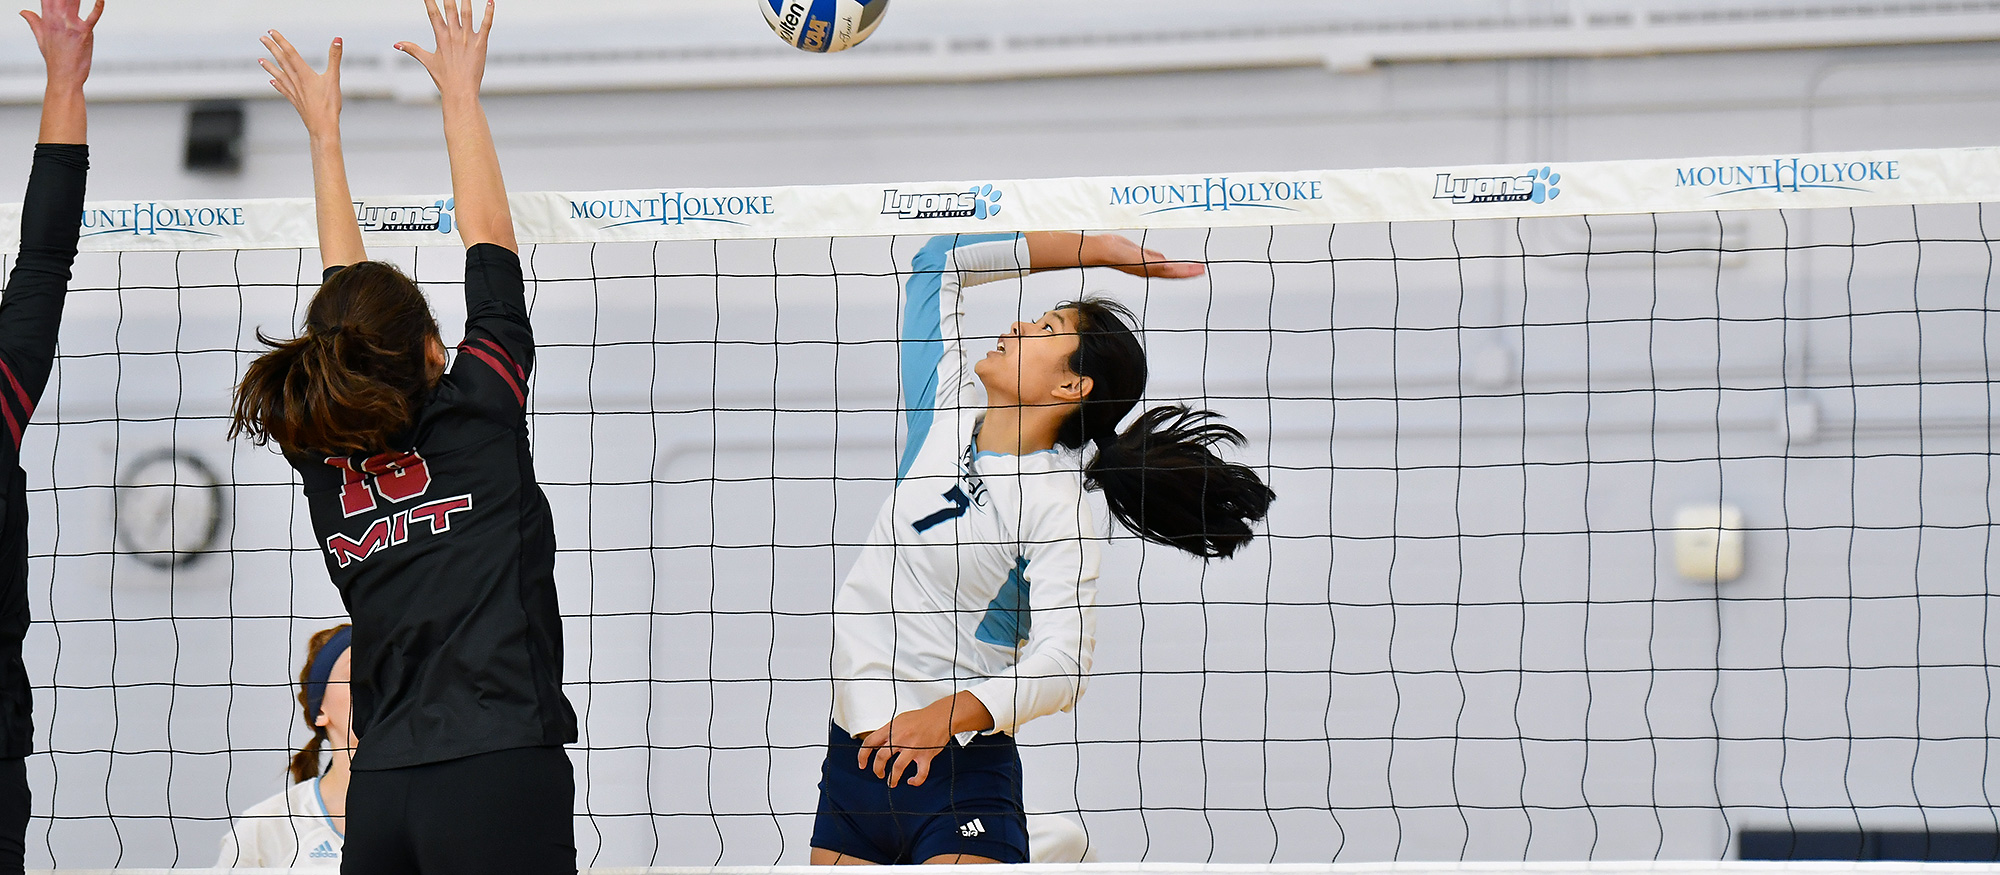 Elle Rimando had nine kills, including three of Mount Holyoke's last six points, in a 3-0 win over Dean College on Sept. 12, 2023. (RJB Sports file photo)